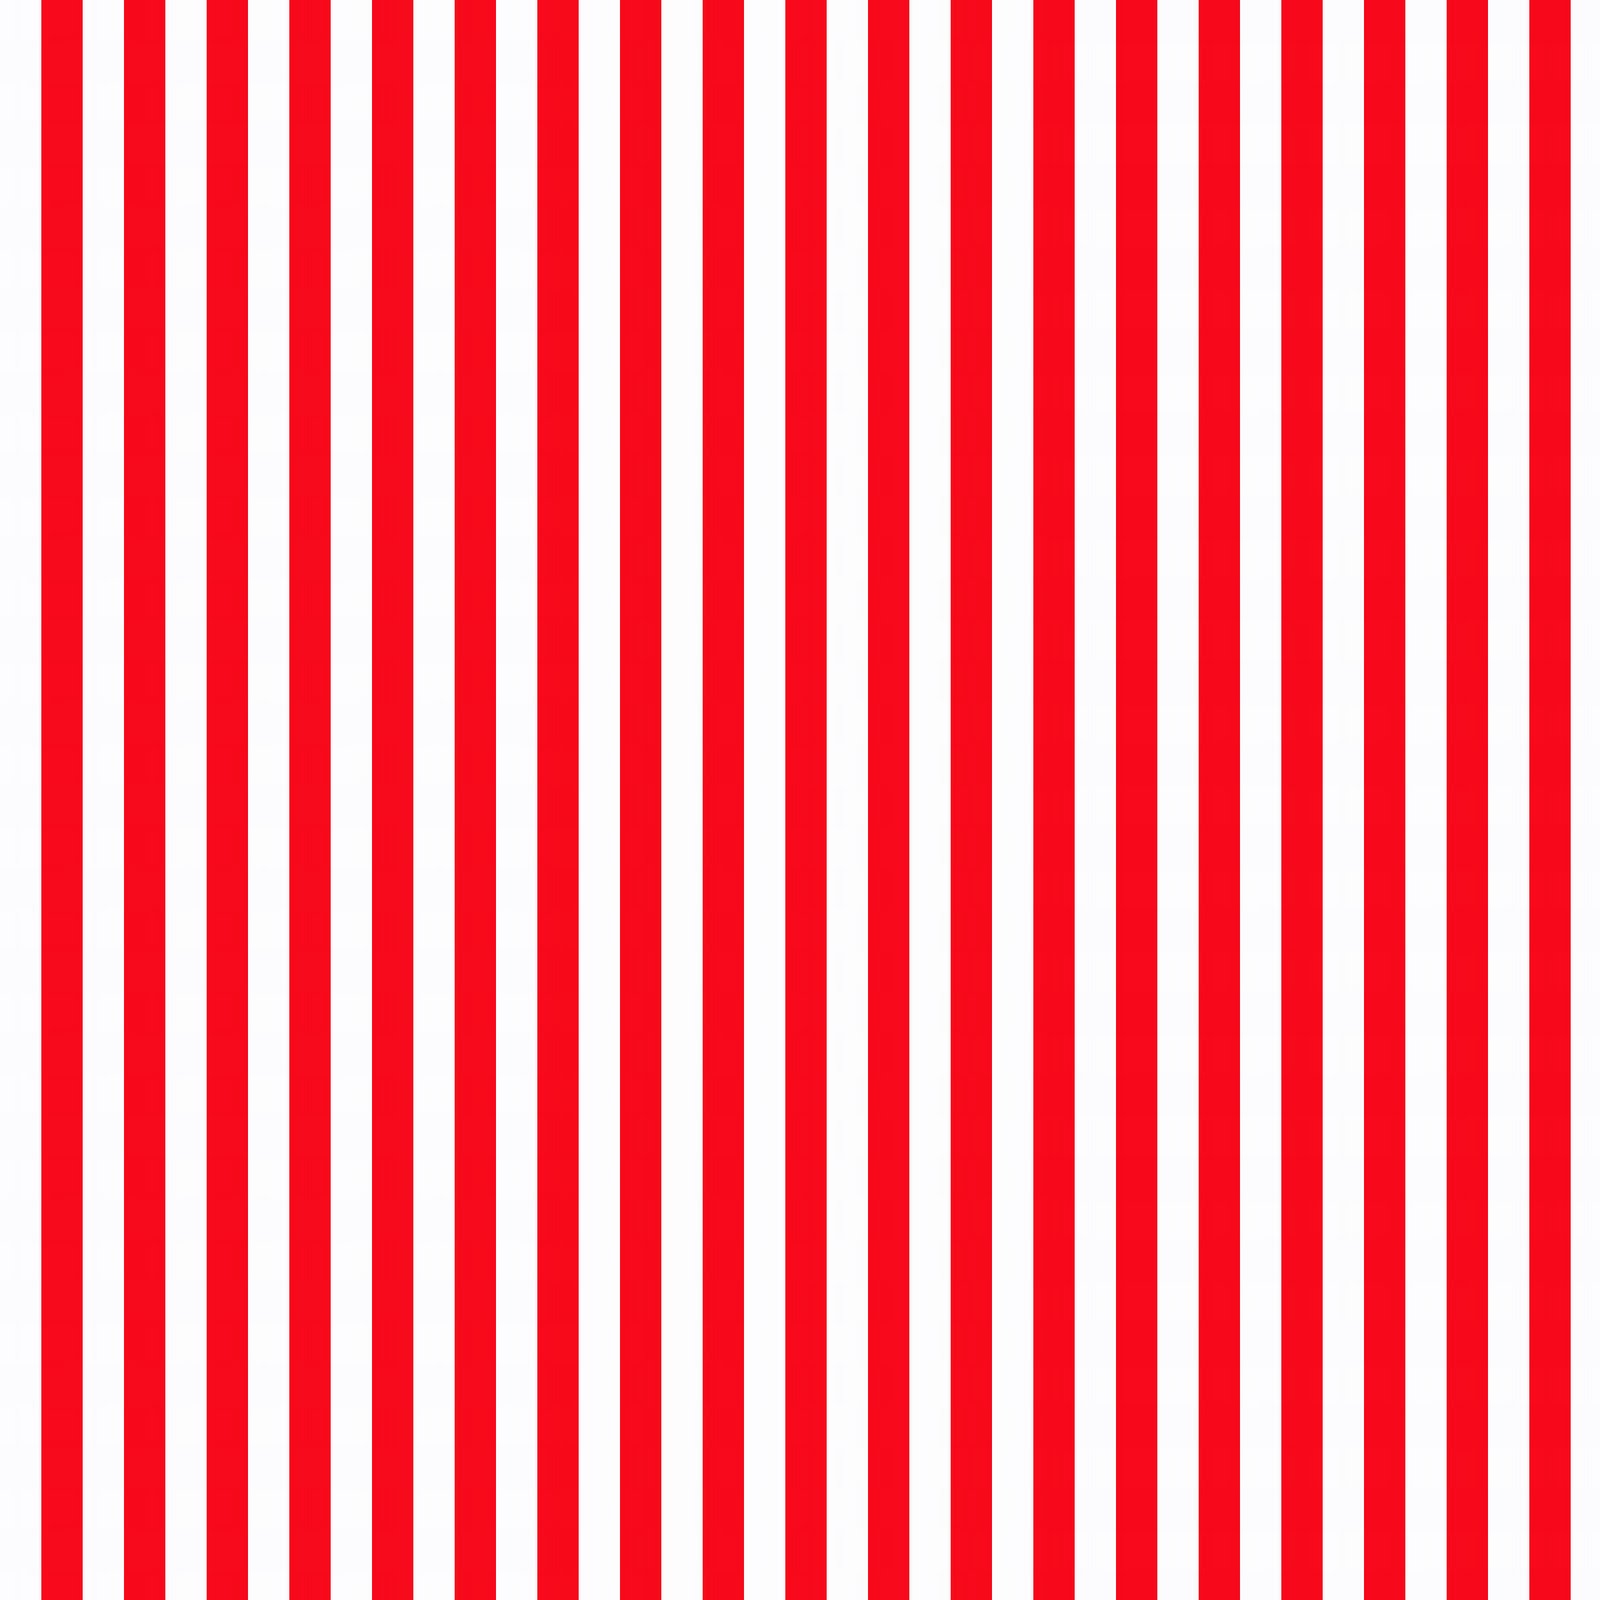 Stampin D Amour Digital Scrapbook Paper Red And White Stripes